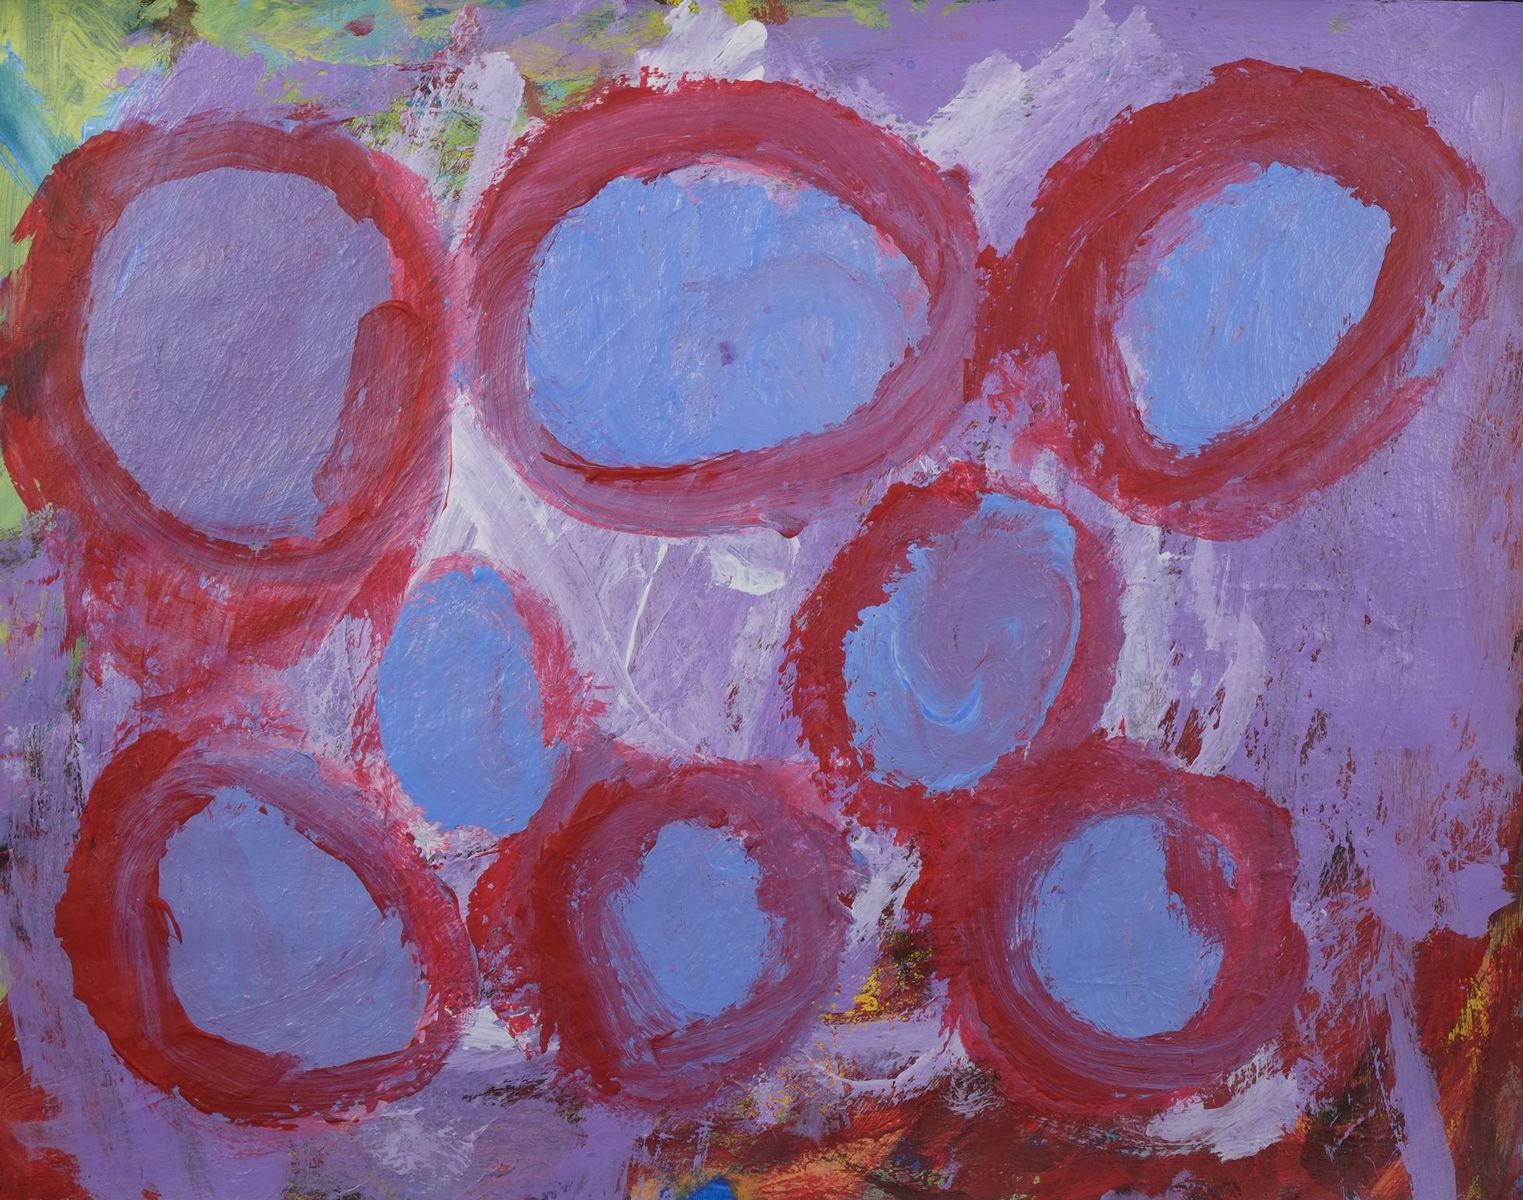 Acrylic on paper artwork with blue and lavender background and red circles on top